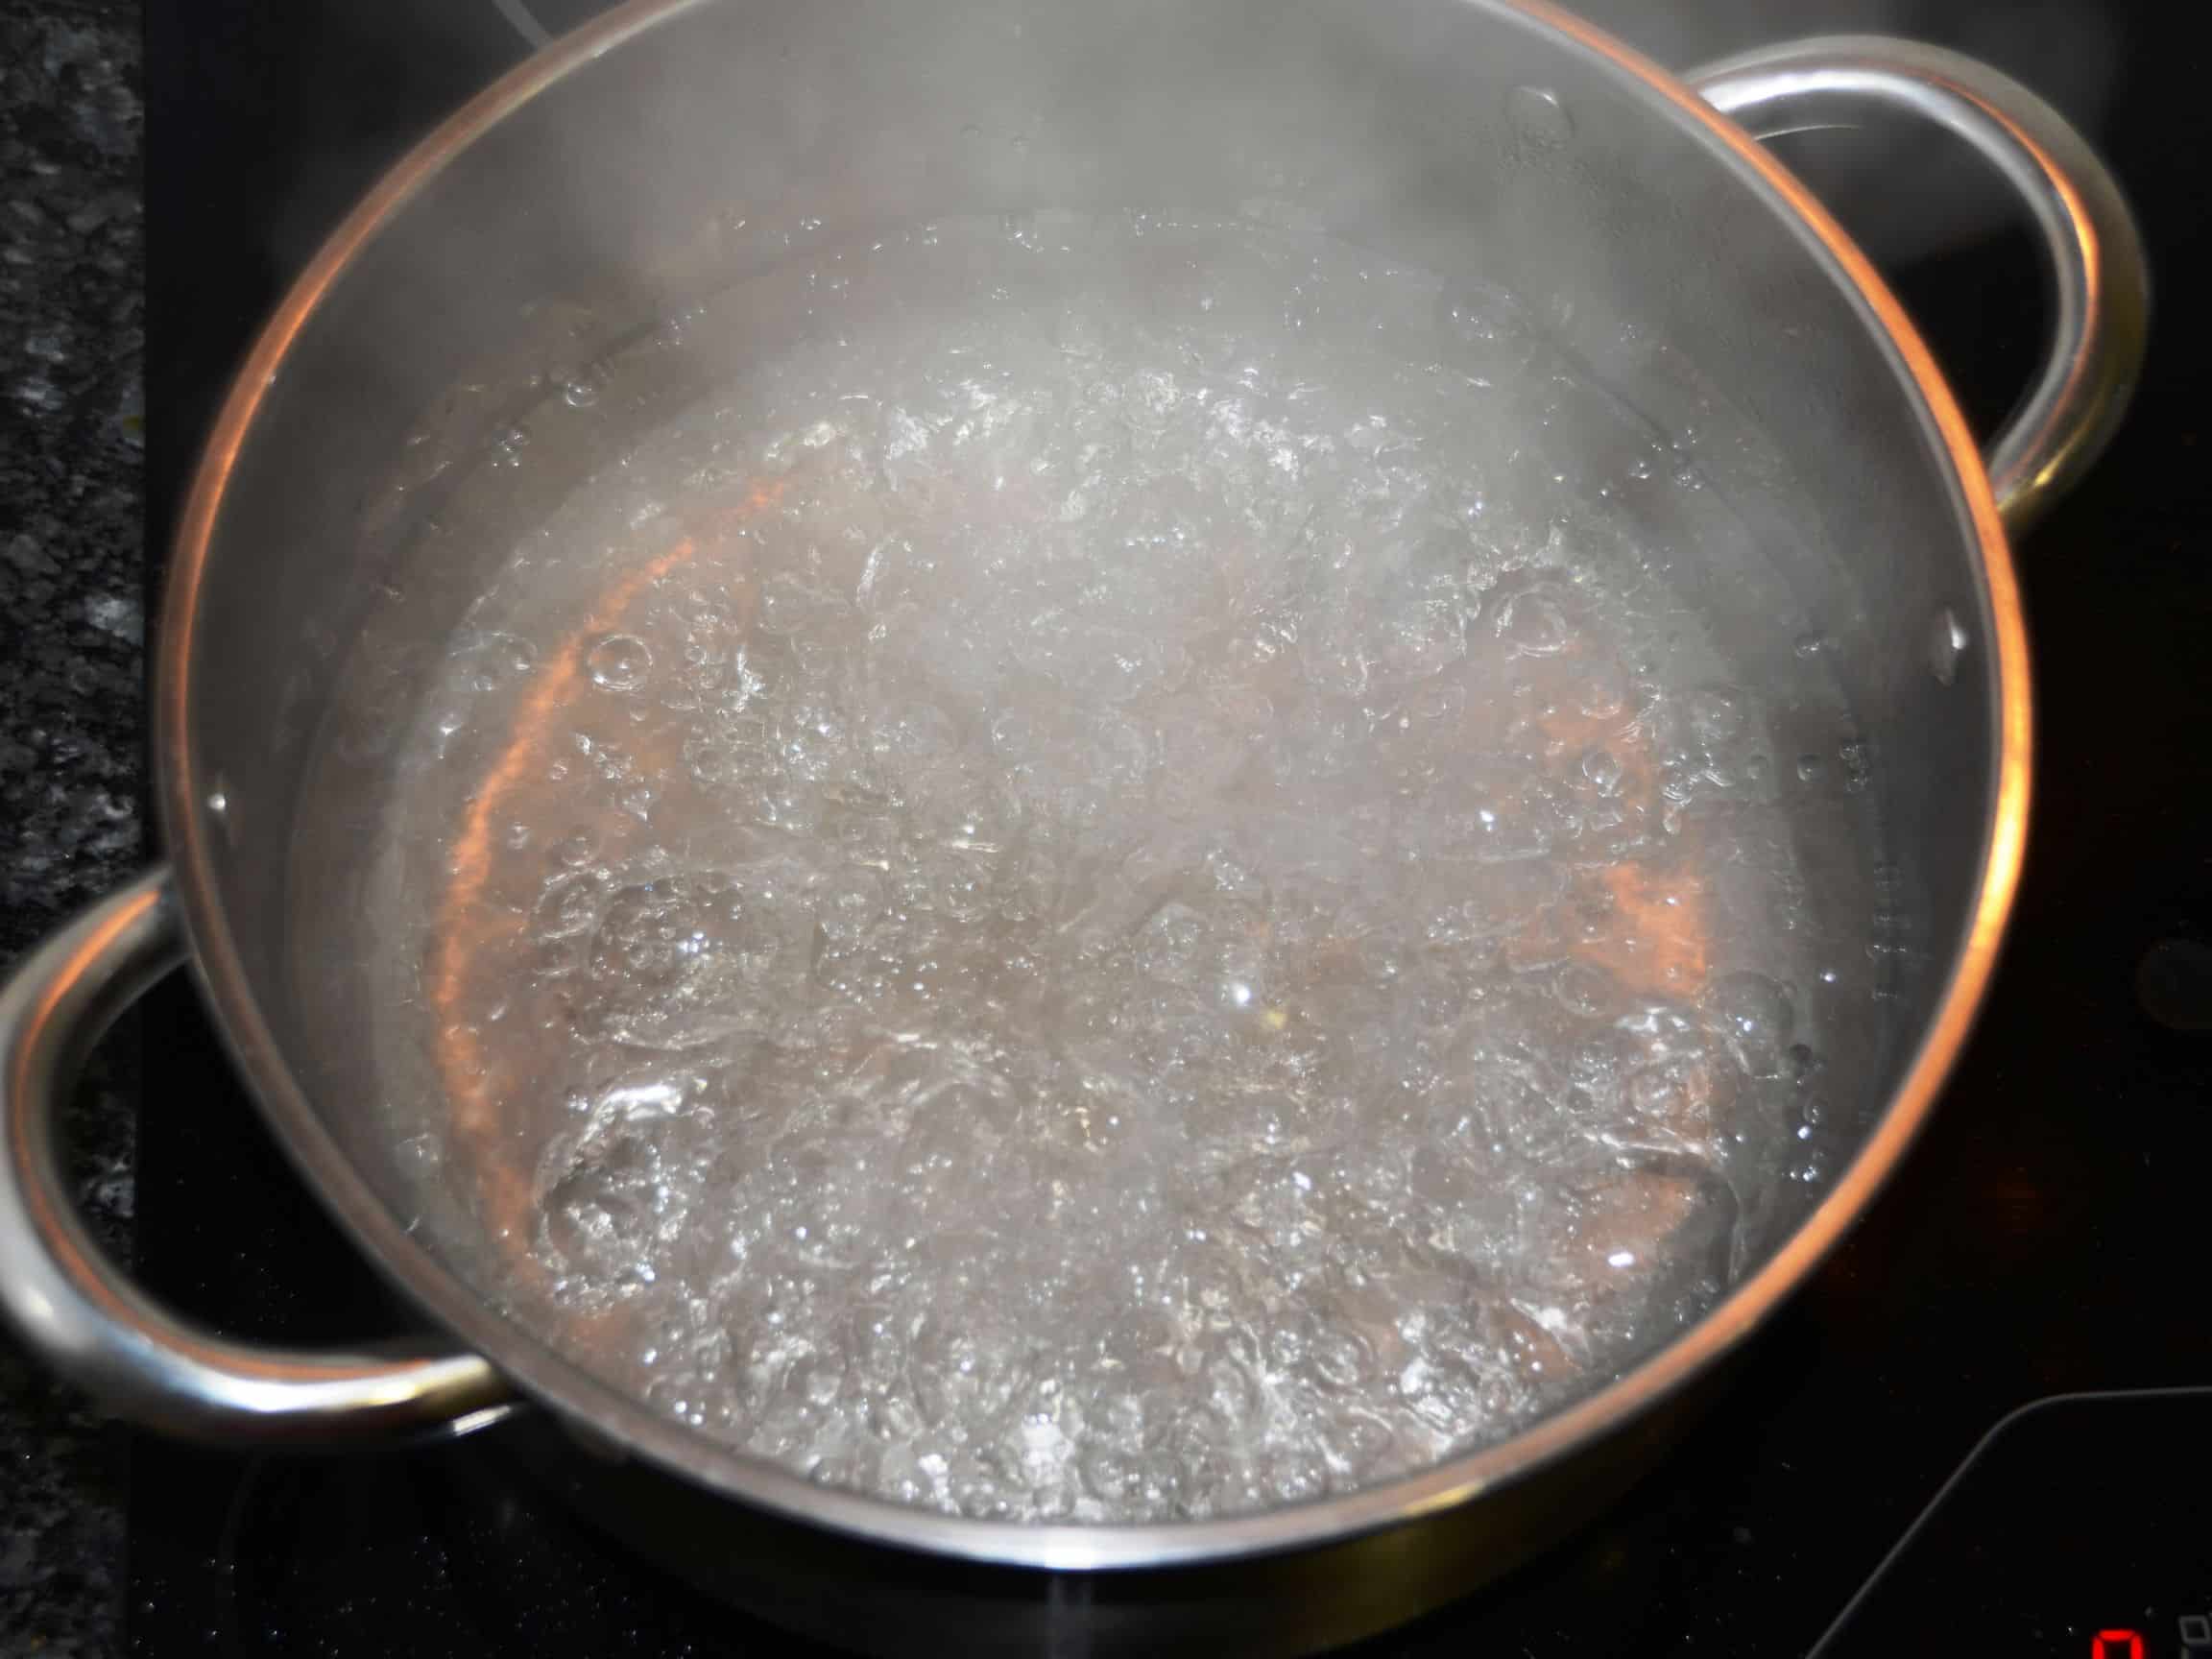 Boiling water in a stainless steel pot.